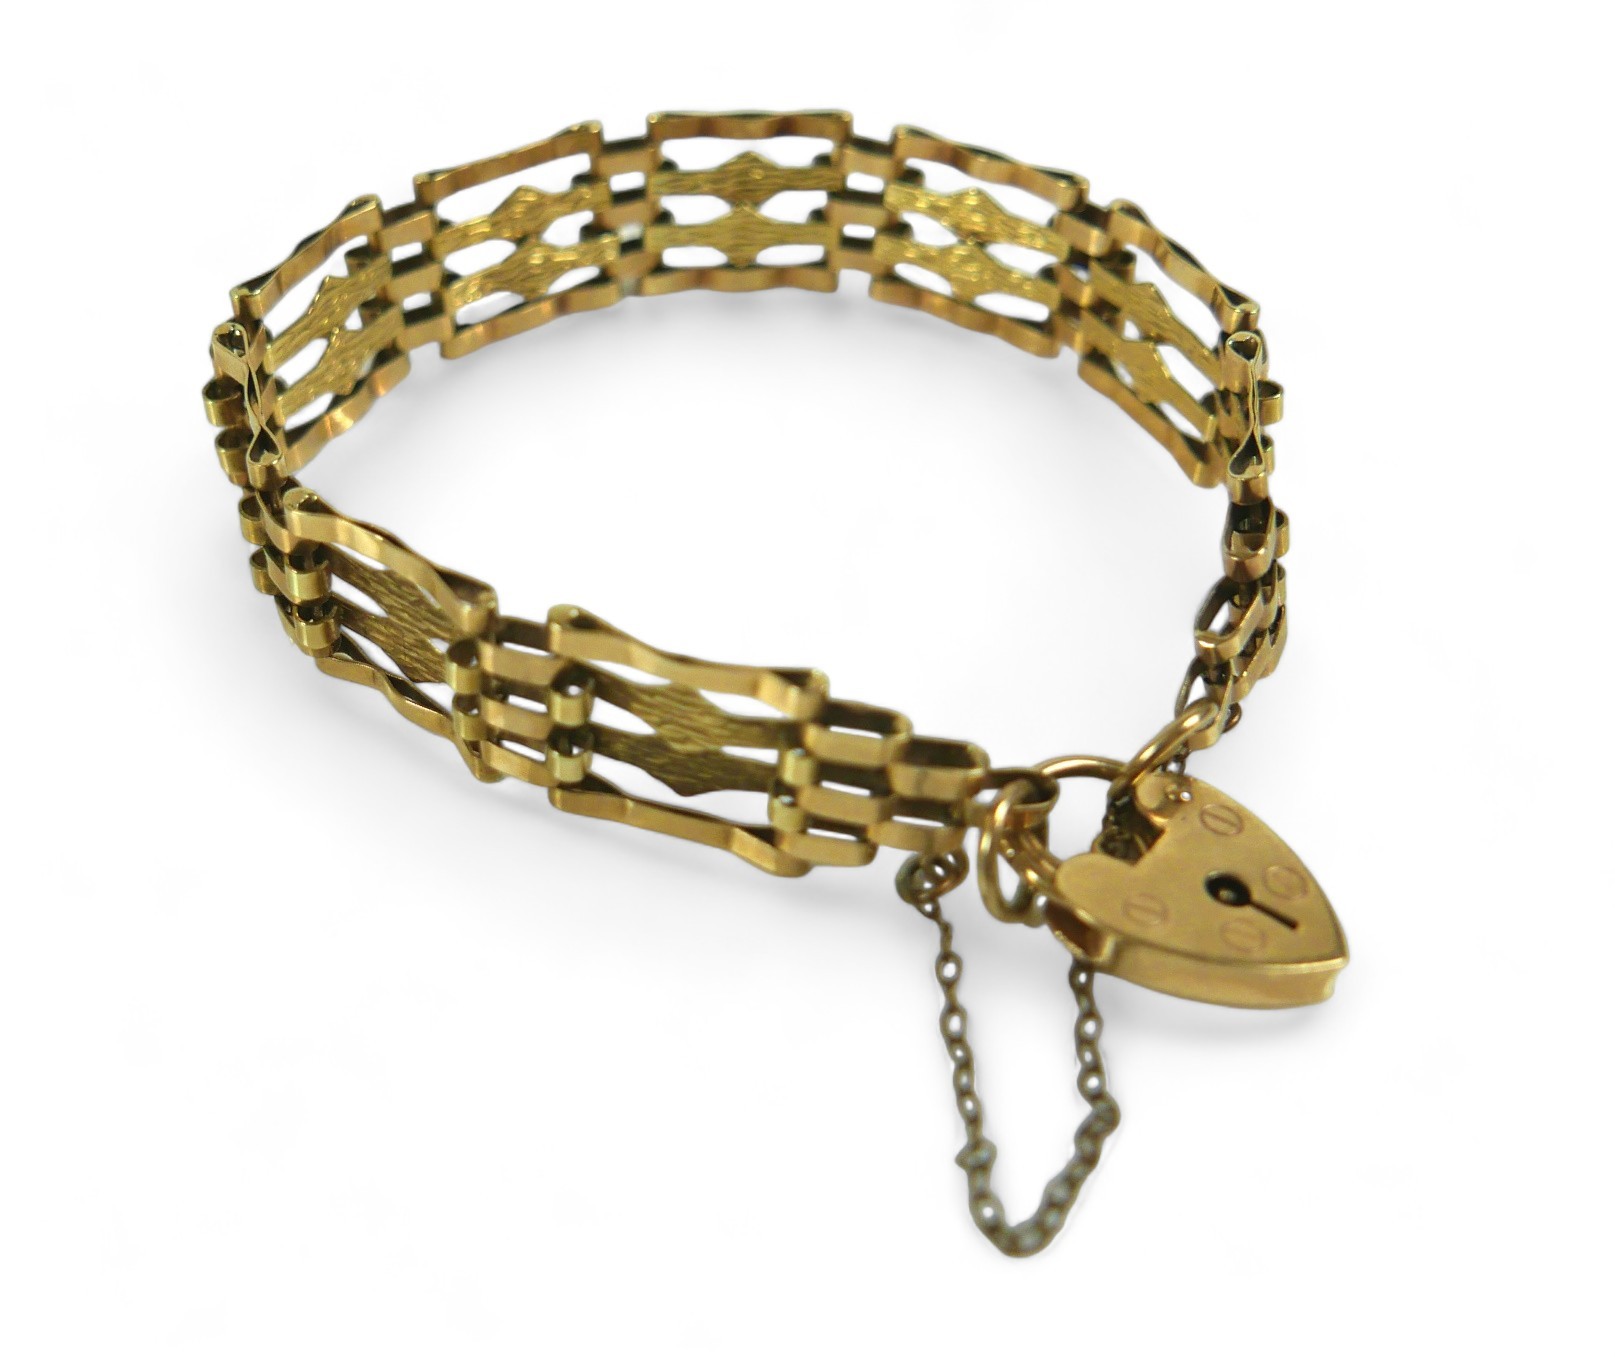 A 9ct gold bar gate bracelet with heart shaped lock and central textured bands, 10.6g.